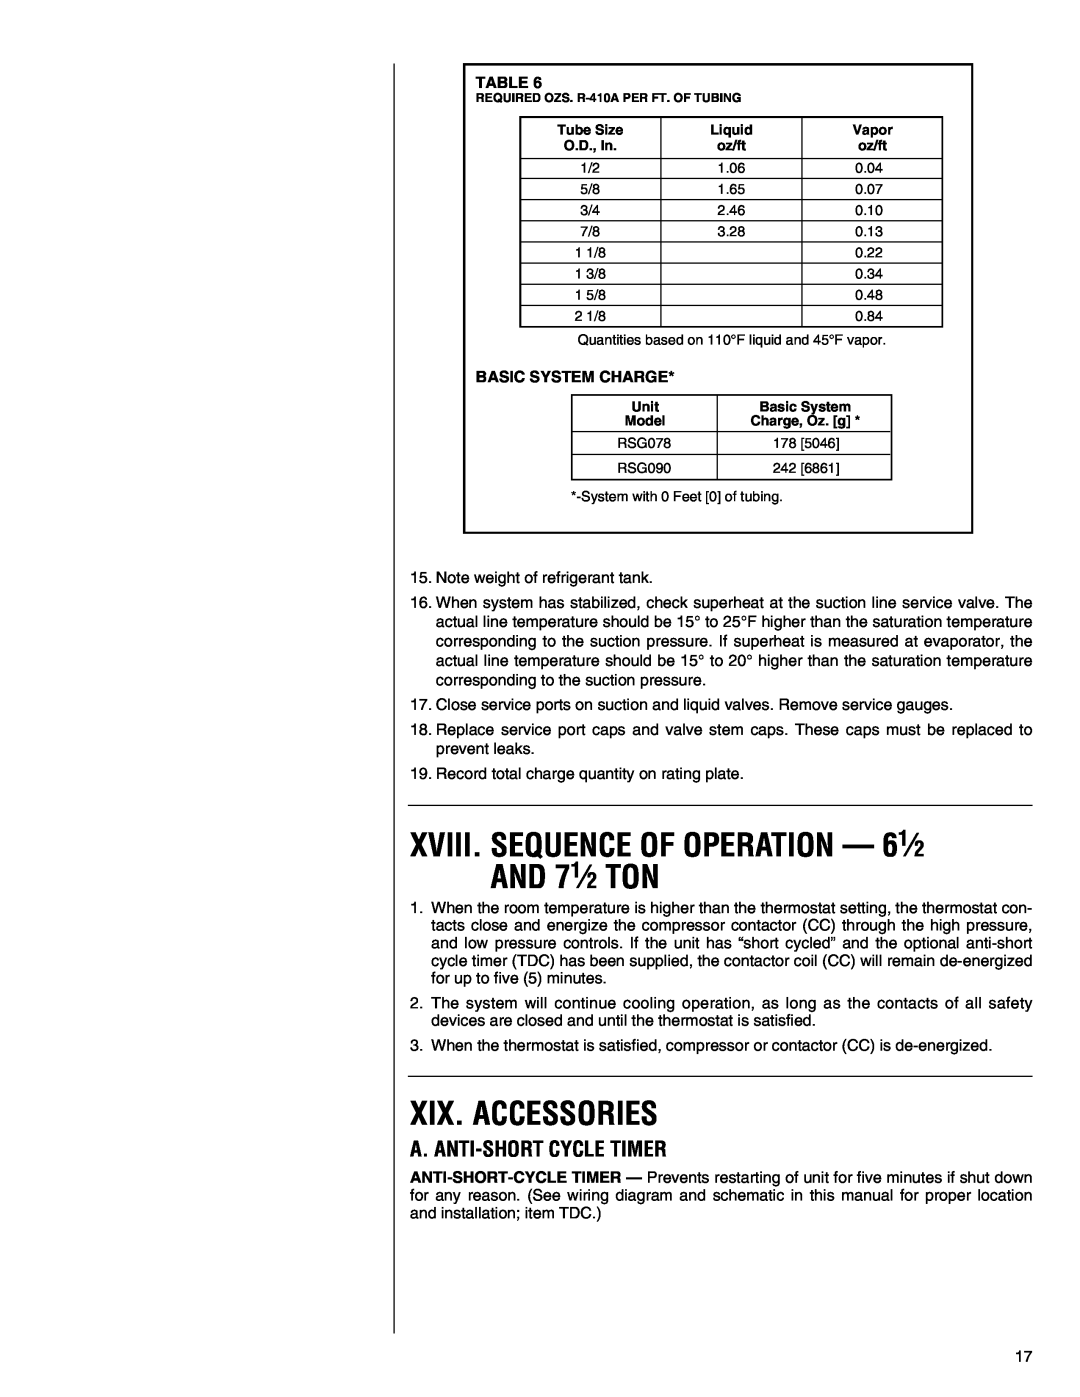 Heat Controller R-410A XVIII. SEQUENCE OF OPERATION - 61⁄2 AND 71⁄2 TON, Xix. Accessories, A. Anti-Shortcycle Timer 